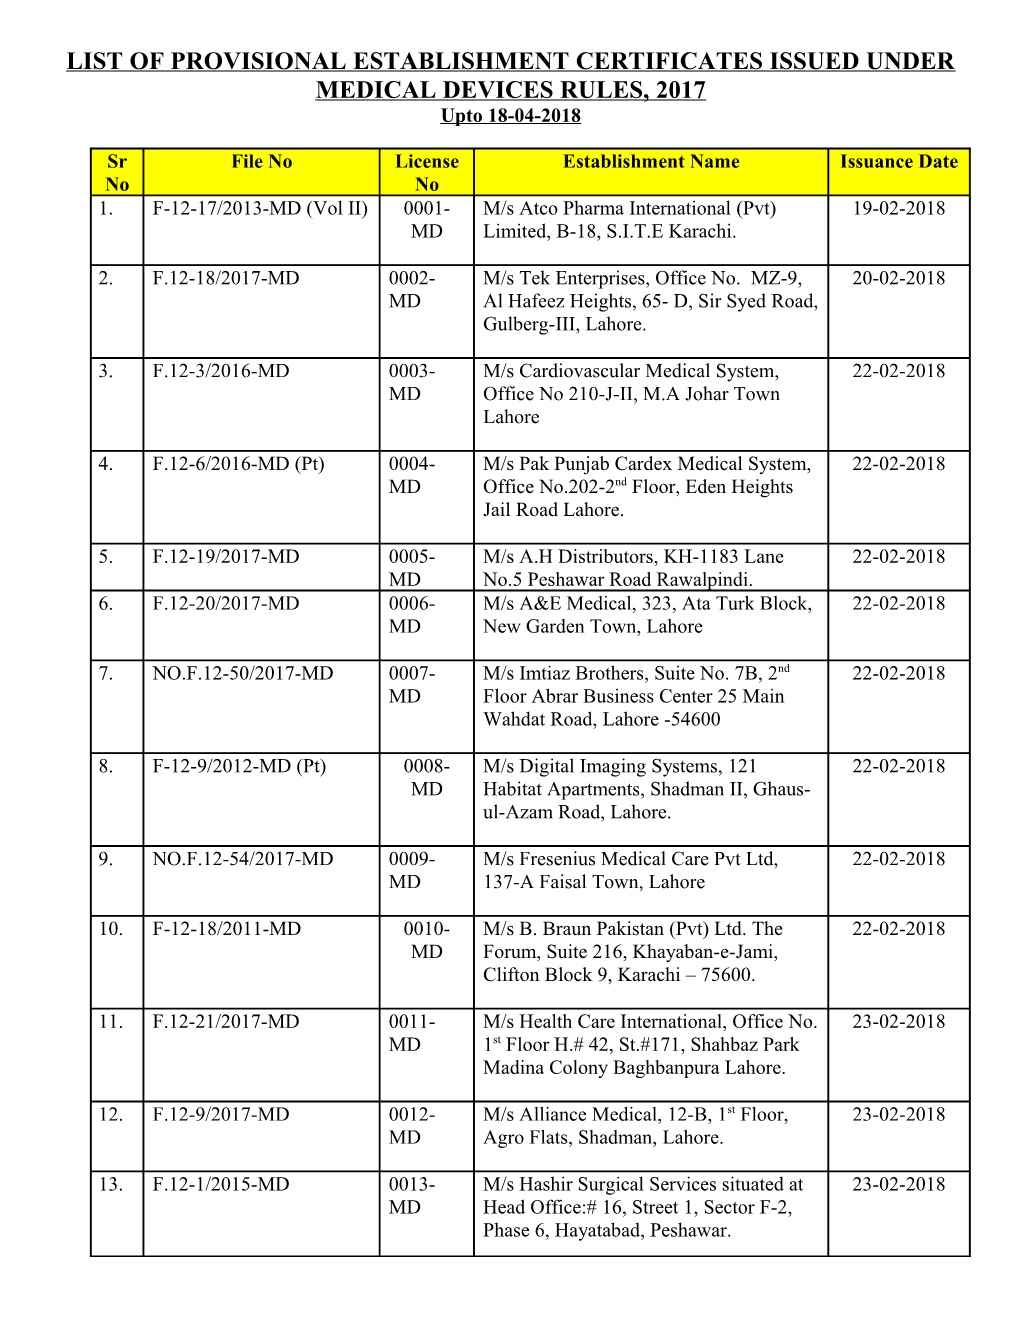 List of Provisional Establishment Certificates Issued Under Medical Devices Rules, 2017